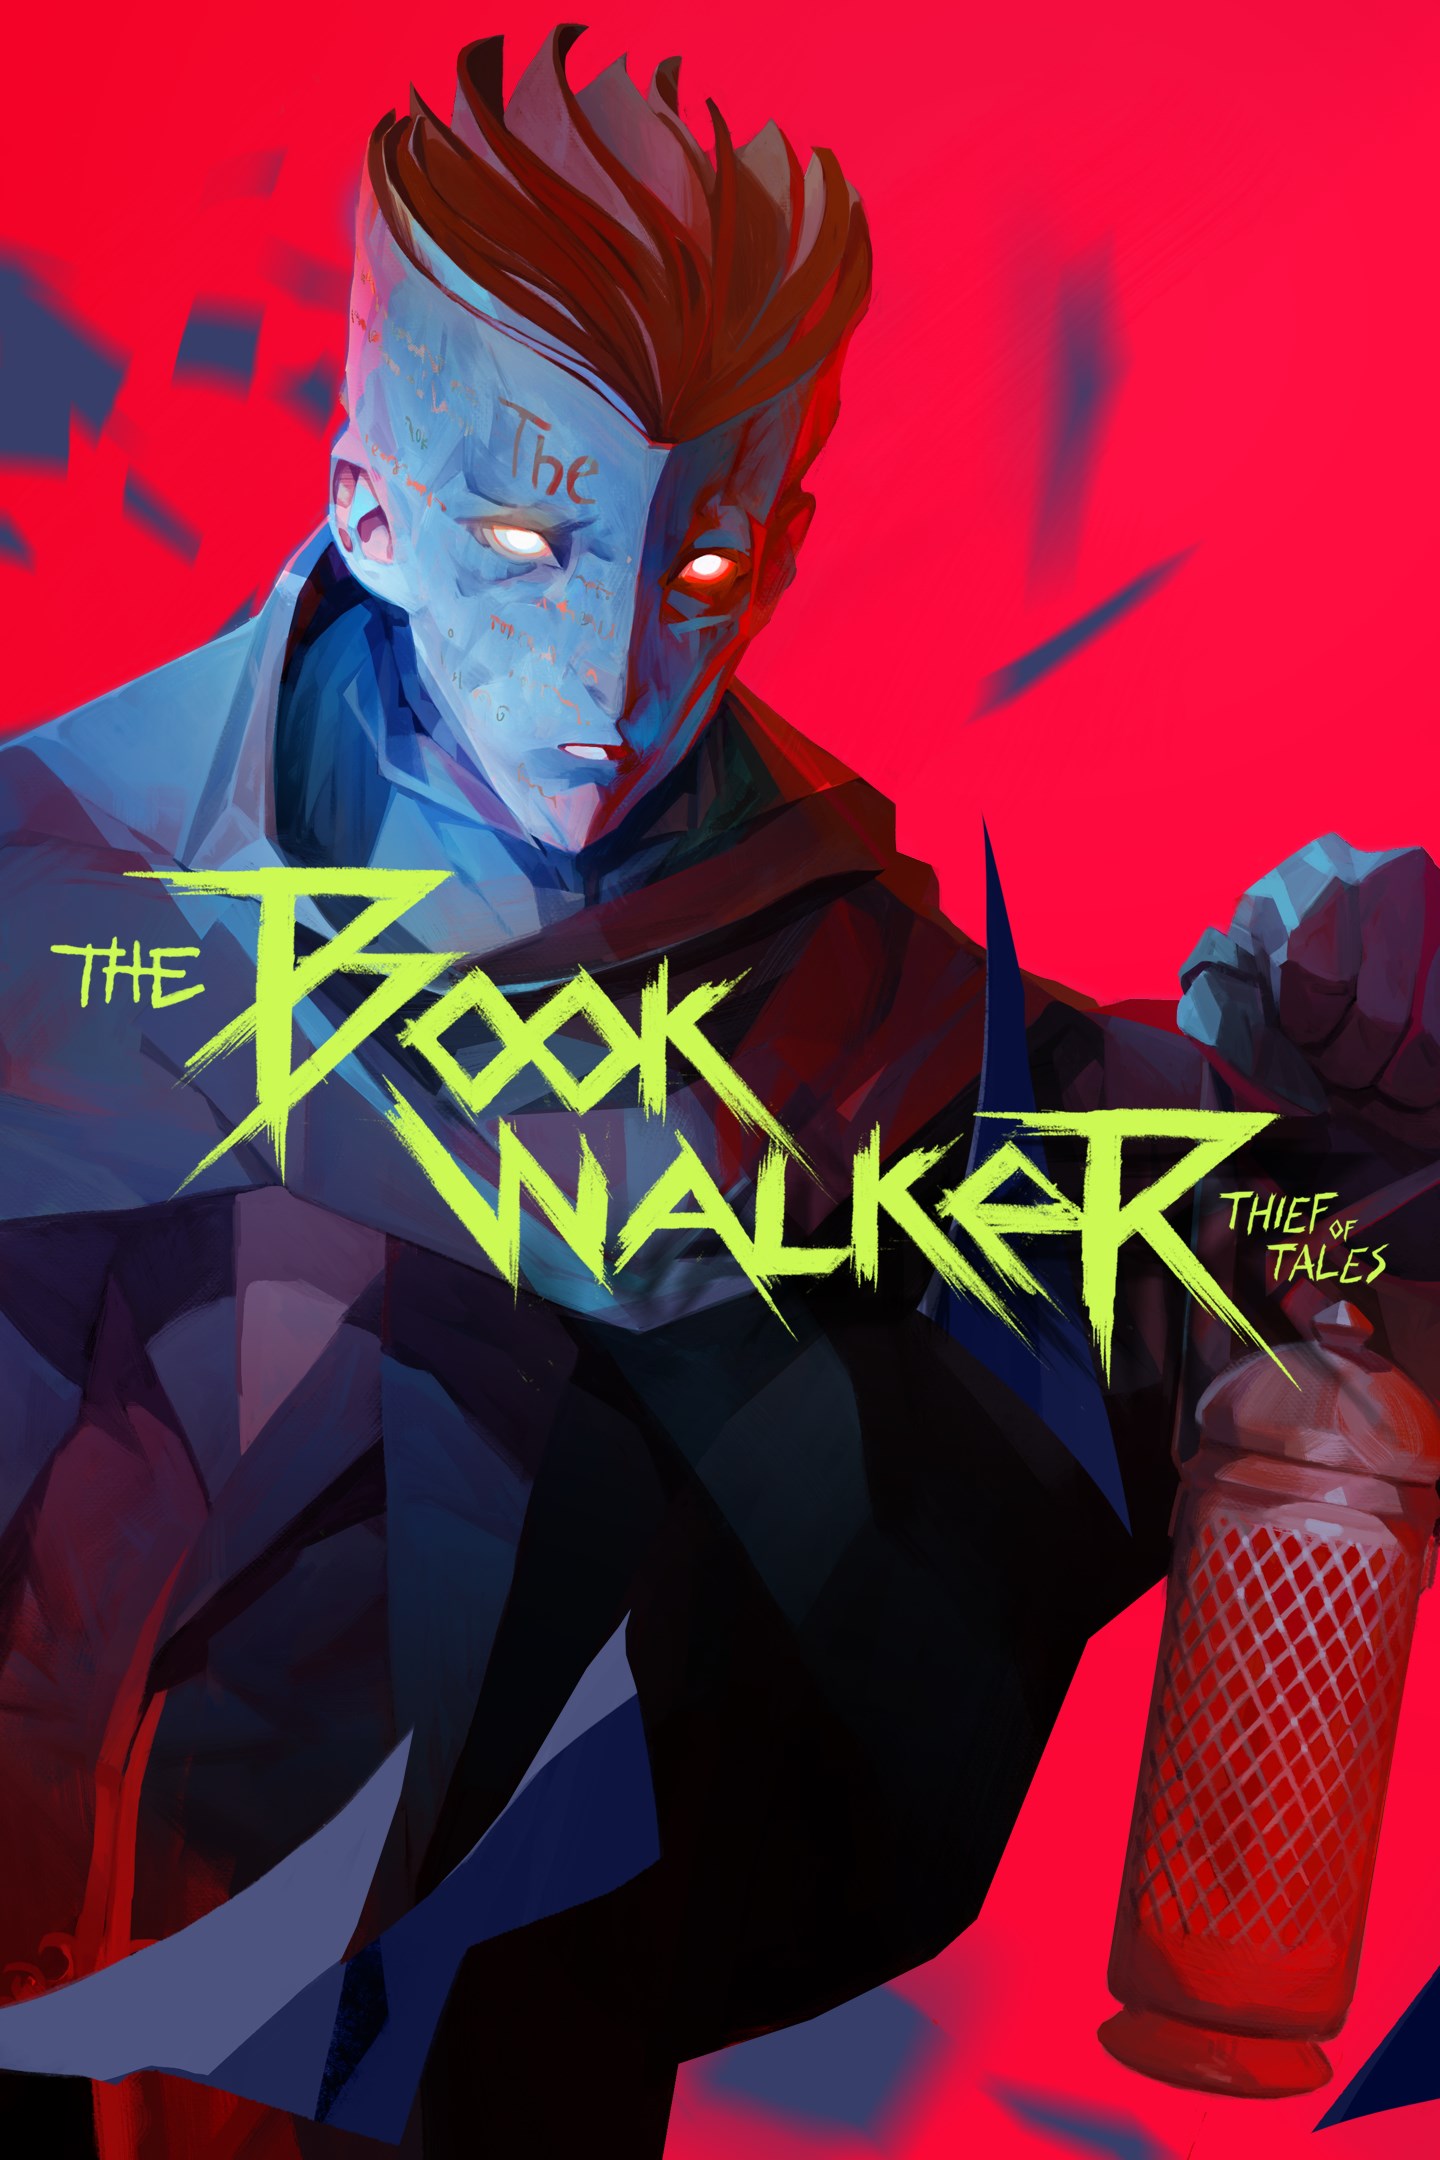 The bookwalker thief of tales